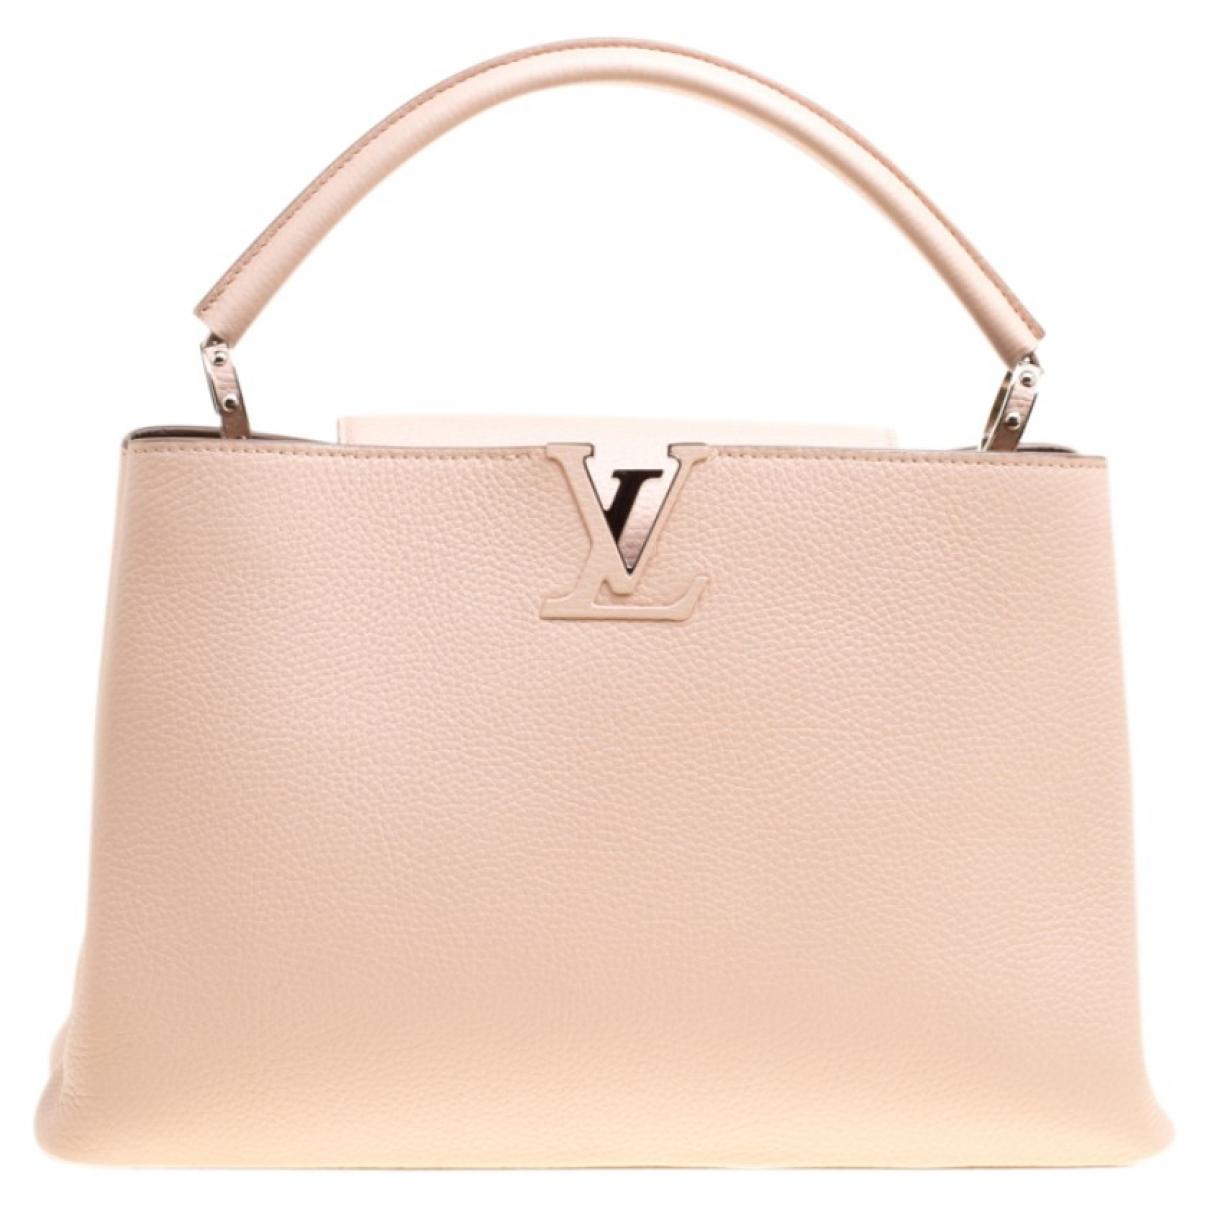 Lyst - Louis Vuitton Pre-owned Capucines Beige Leather Handbags in Natural